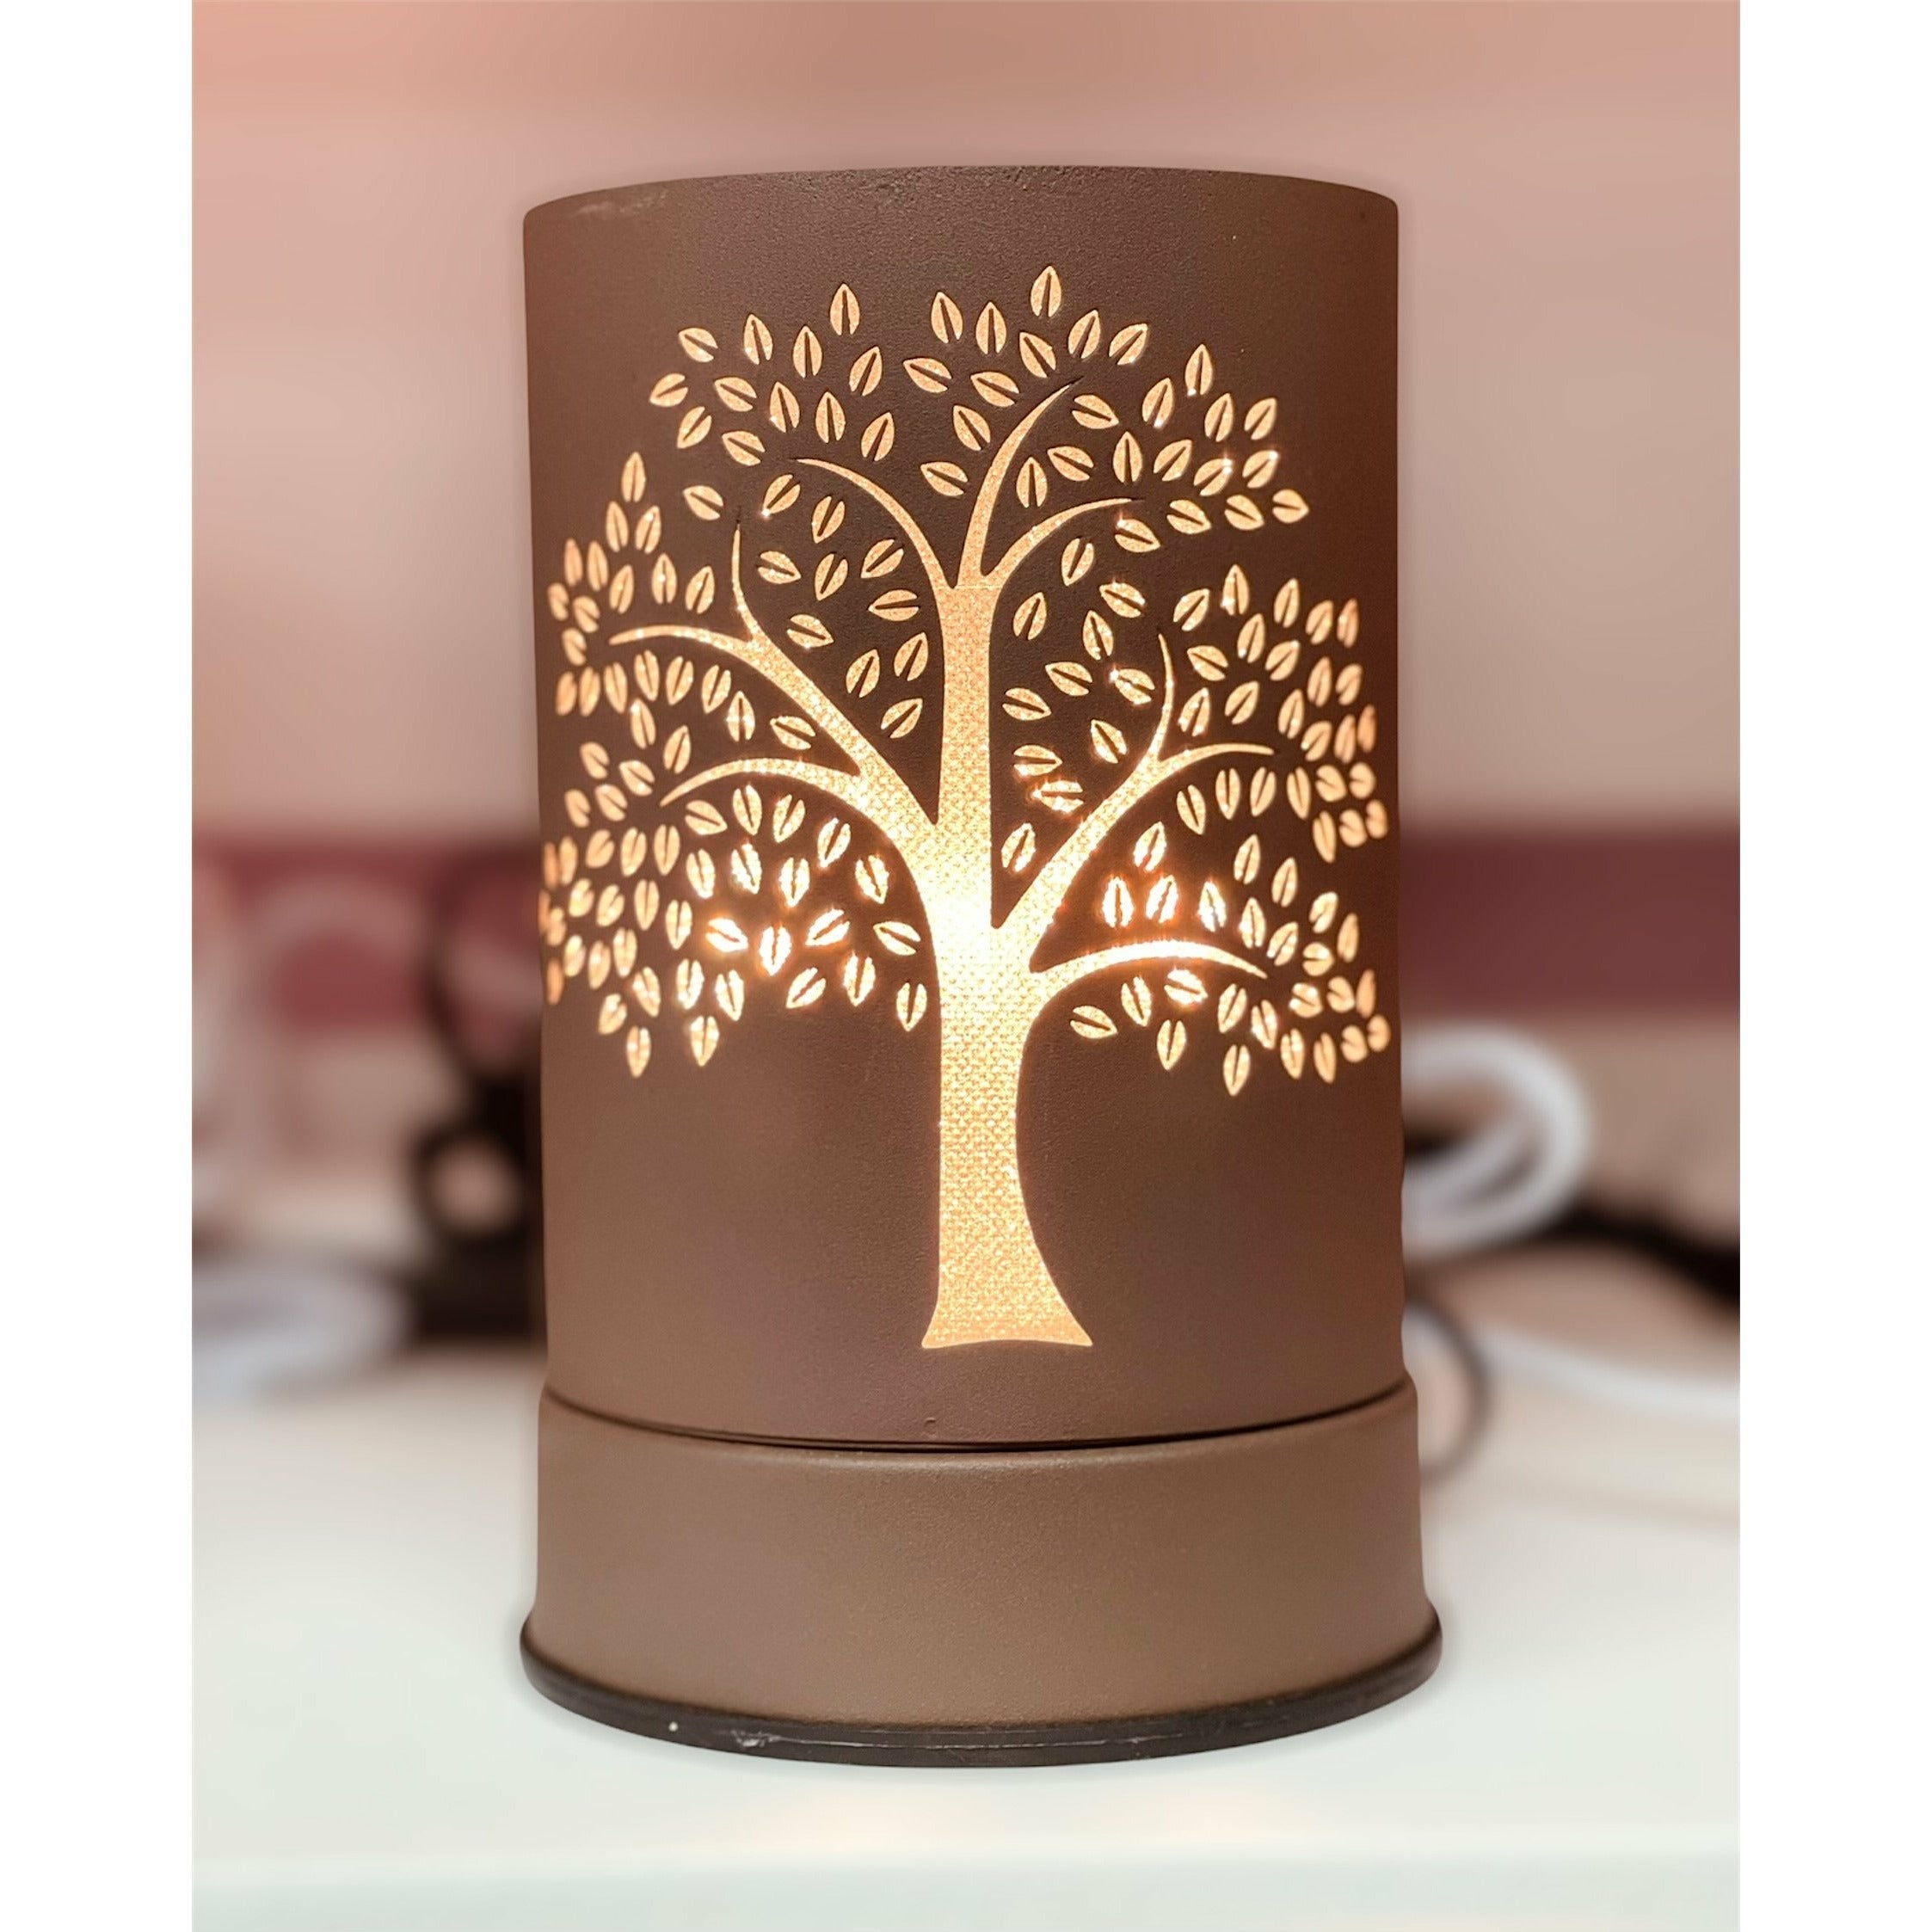 Tree of Life Scentchip Touch Lantern Warmer